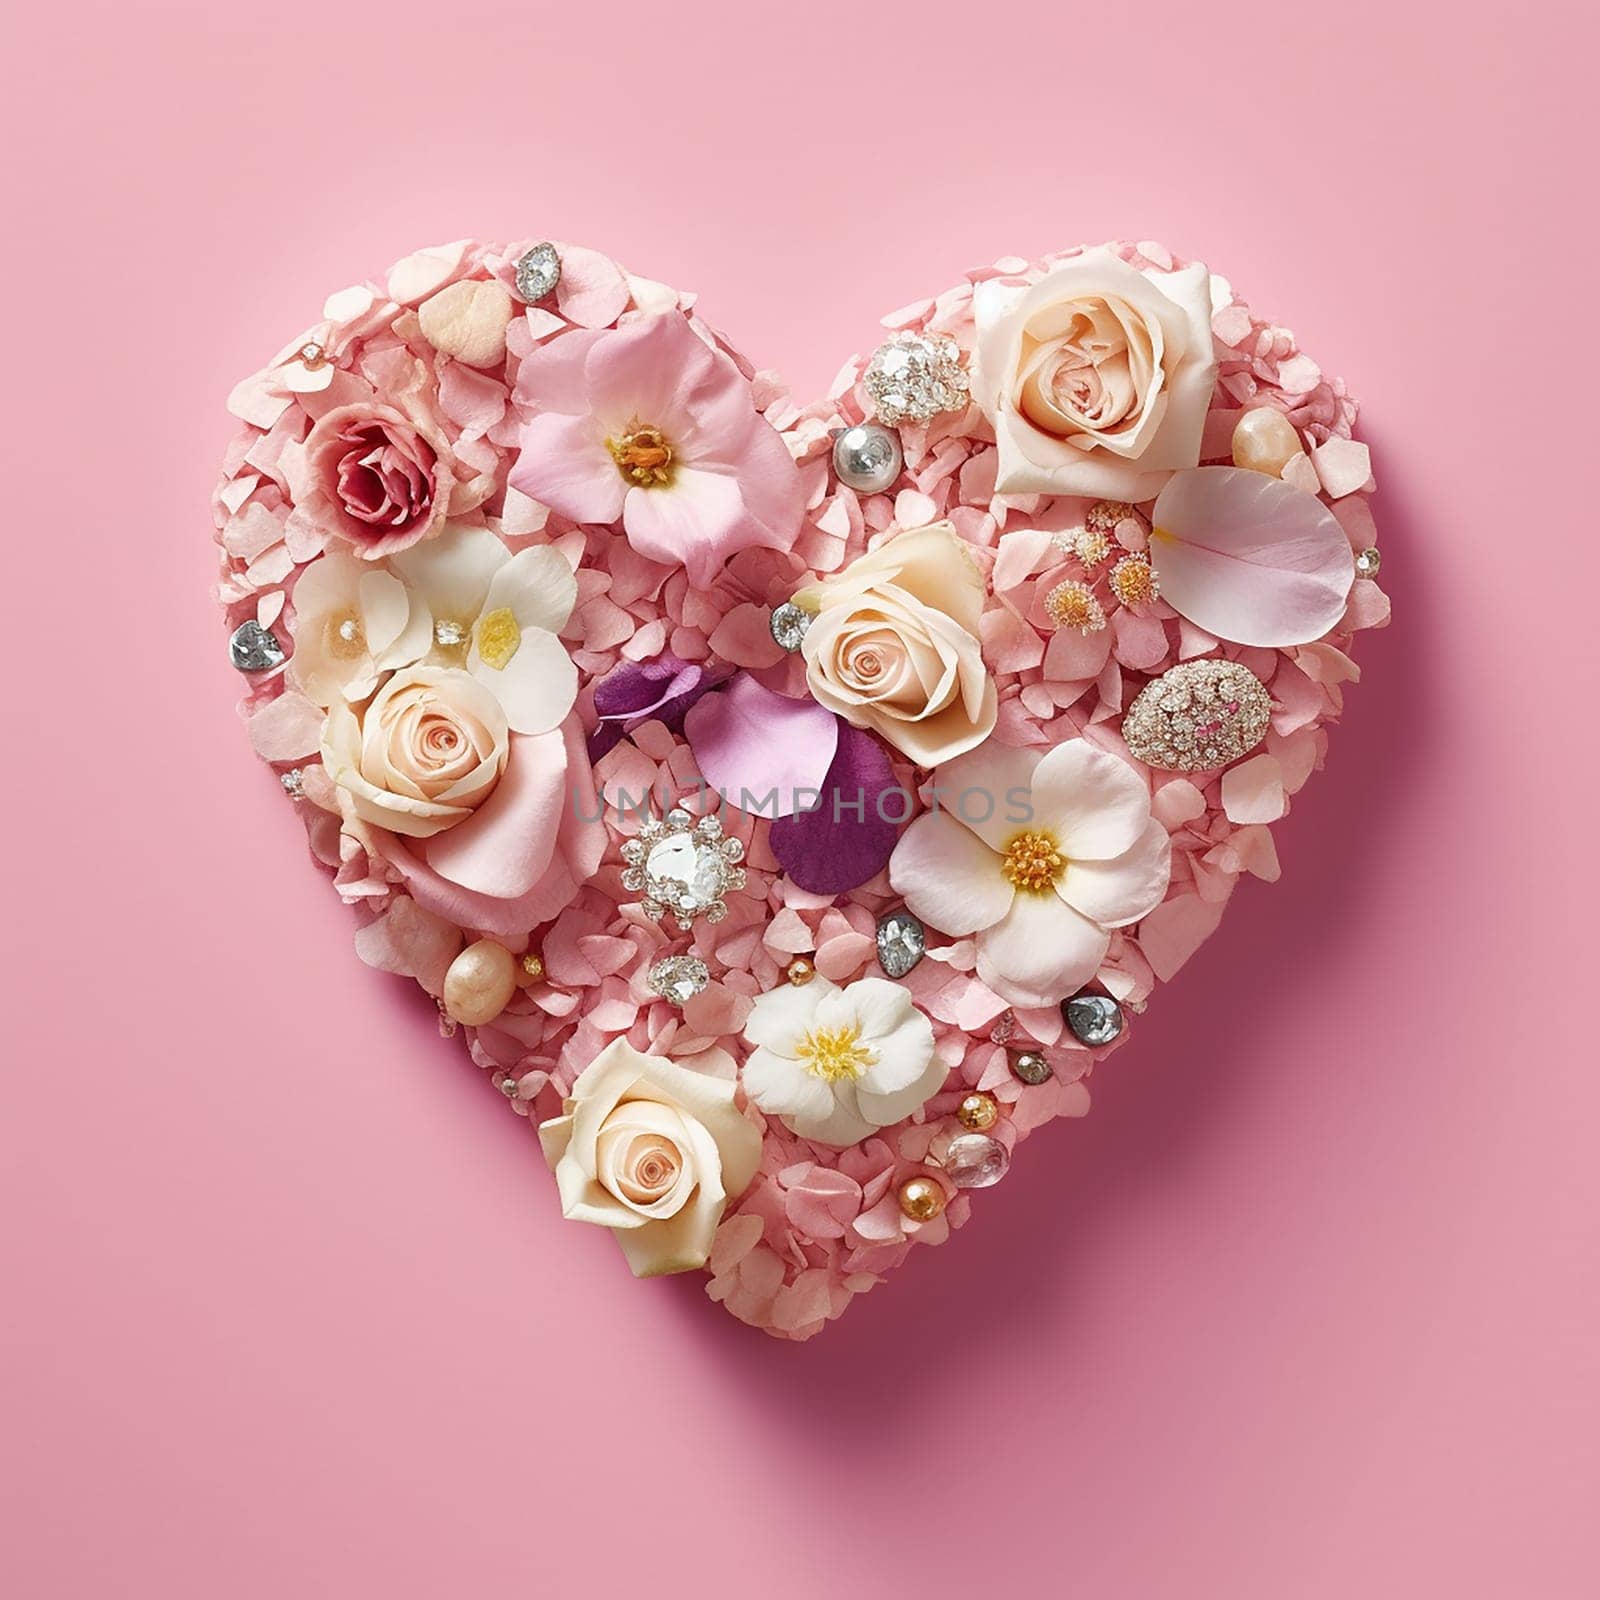 A heart-shaped arrangement of flowers and jewels on a pink background.